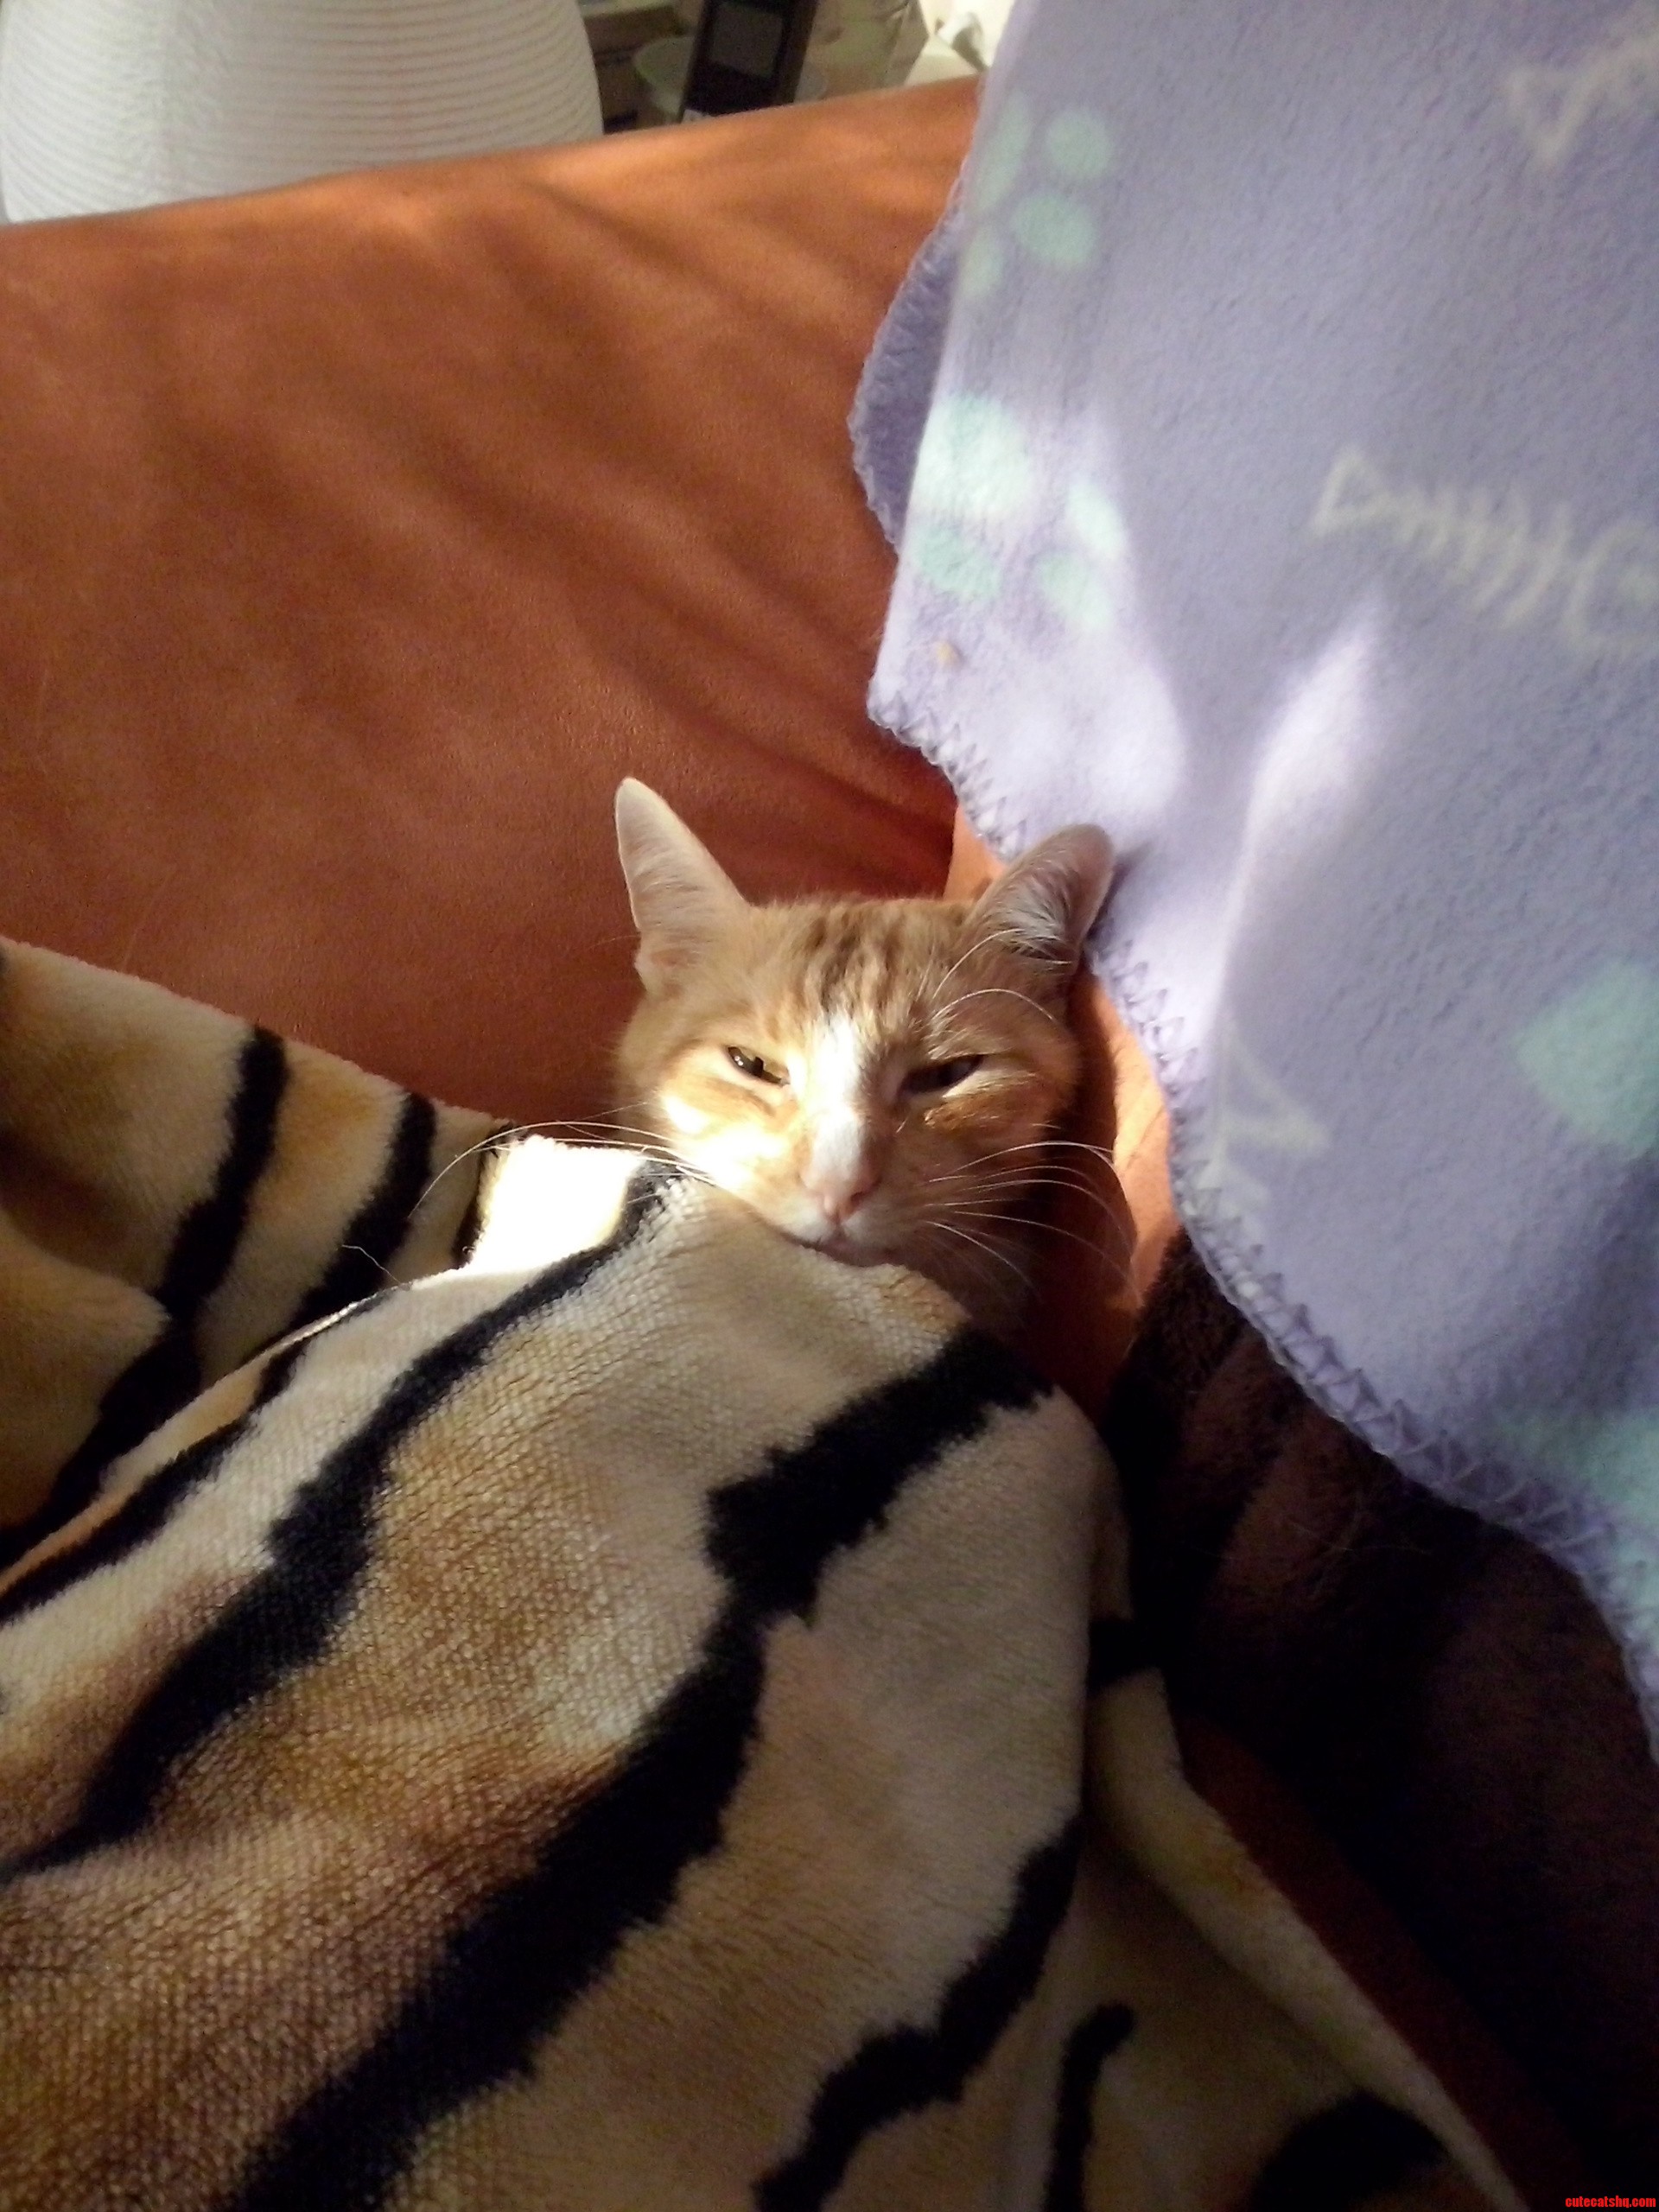 This Is Lenny And He Loves His Blanket.